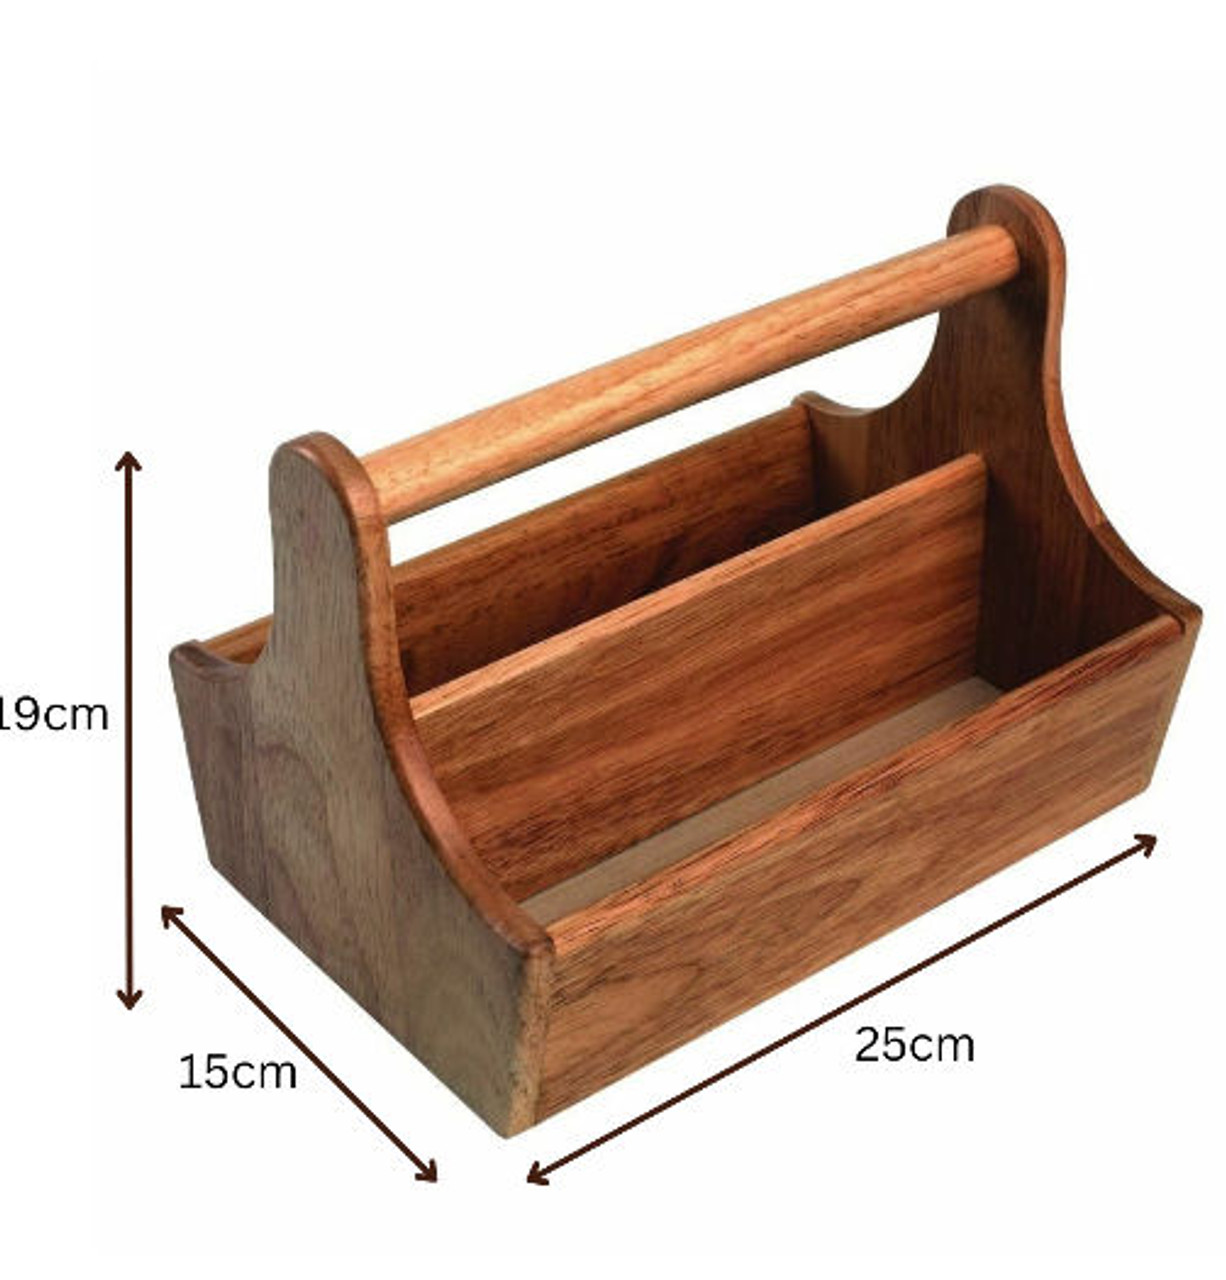 Acacia Wood Table Tidy with handle 25 x 19 x 15cm